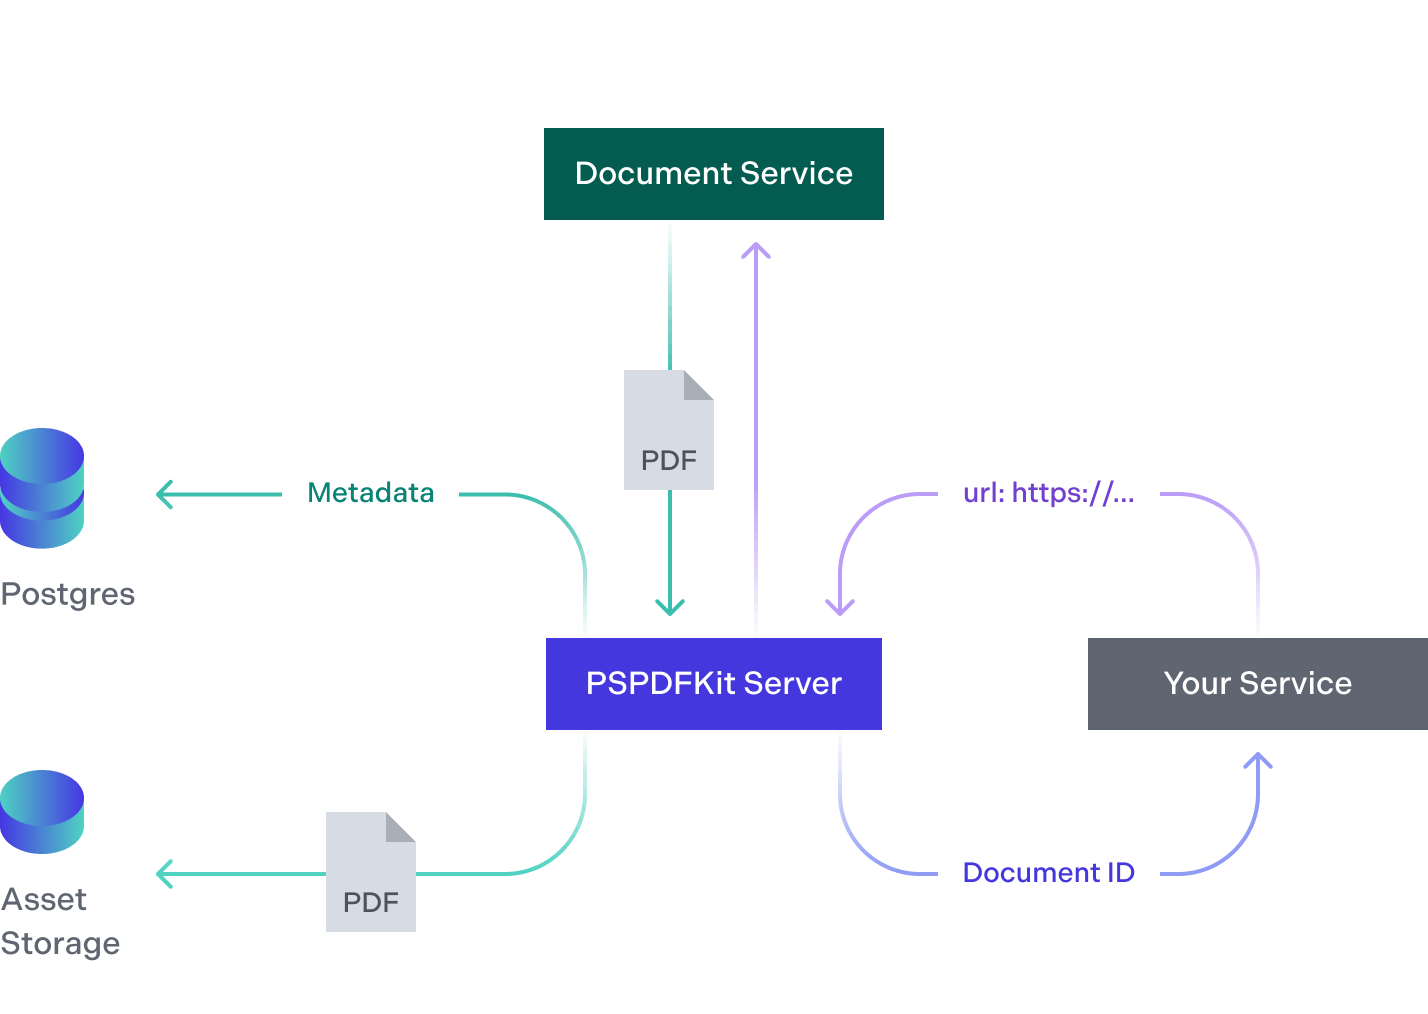 Your Server sends a document’s URL to PSPDFKit Server and receives a document ID back.